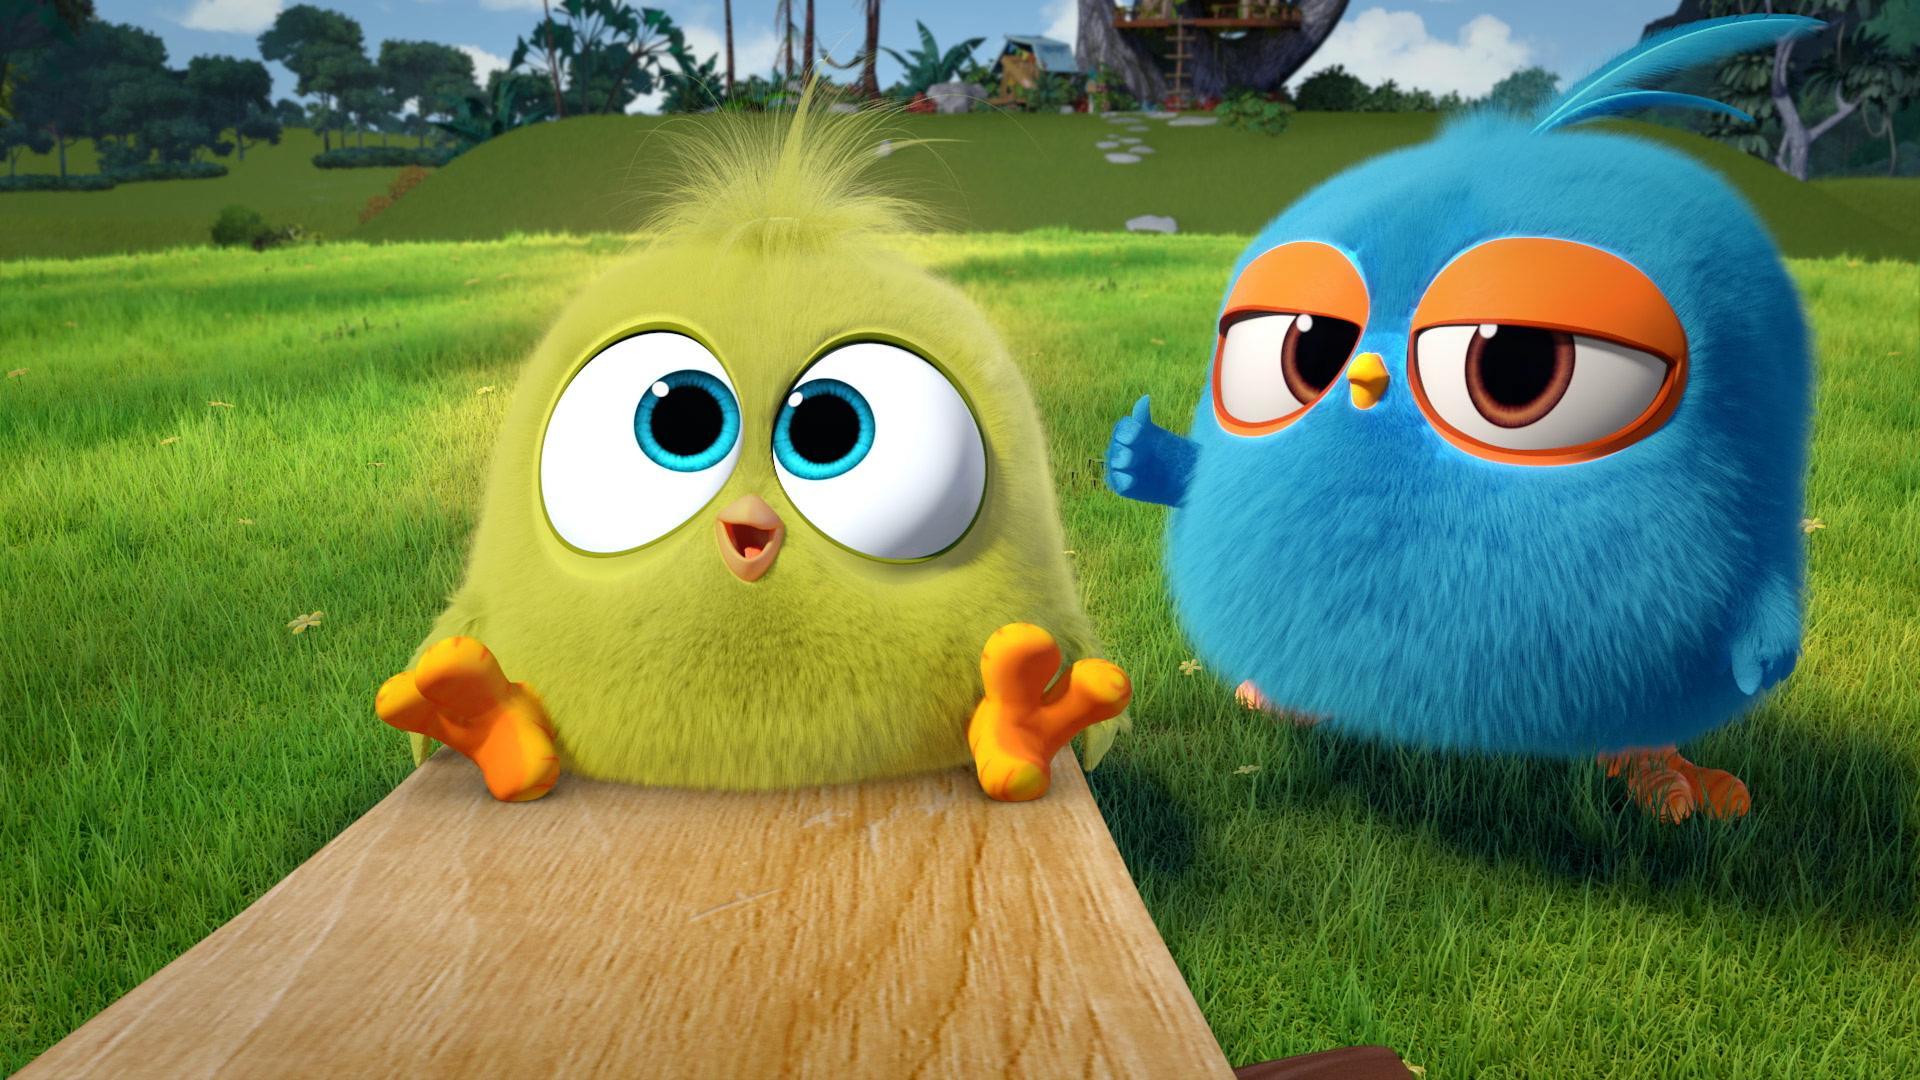 angry birds the blues crying